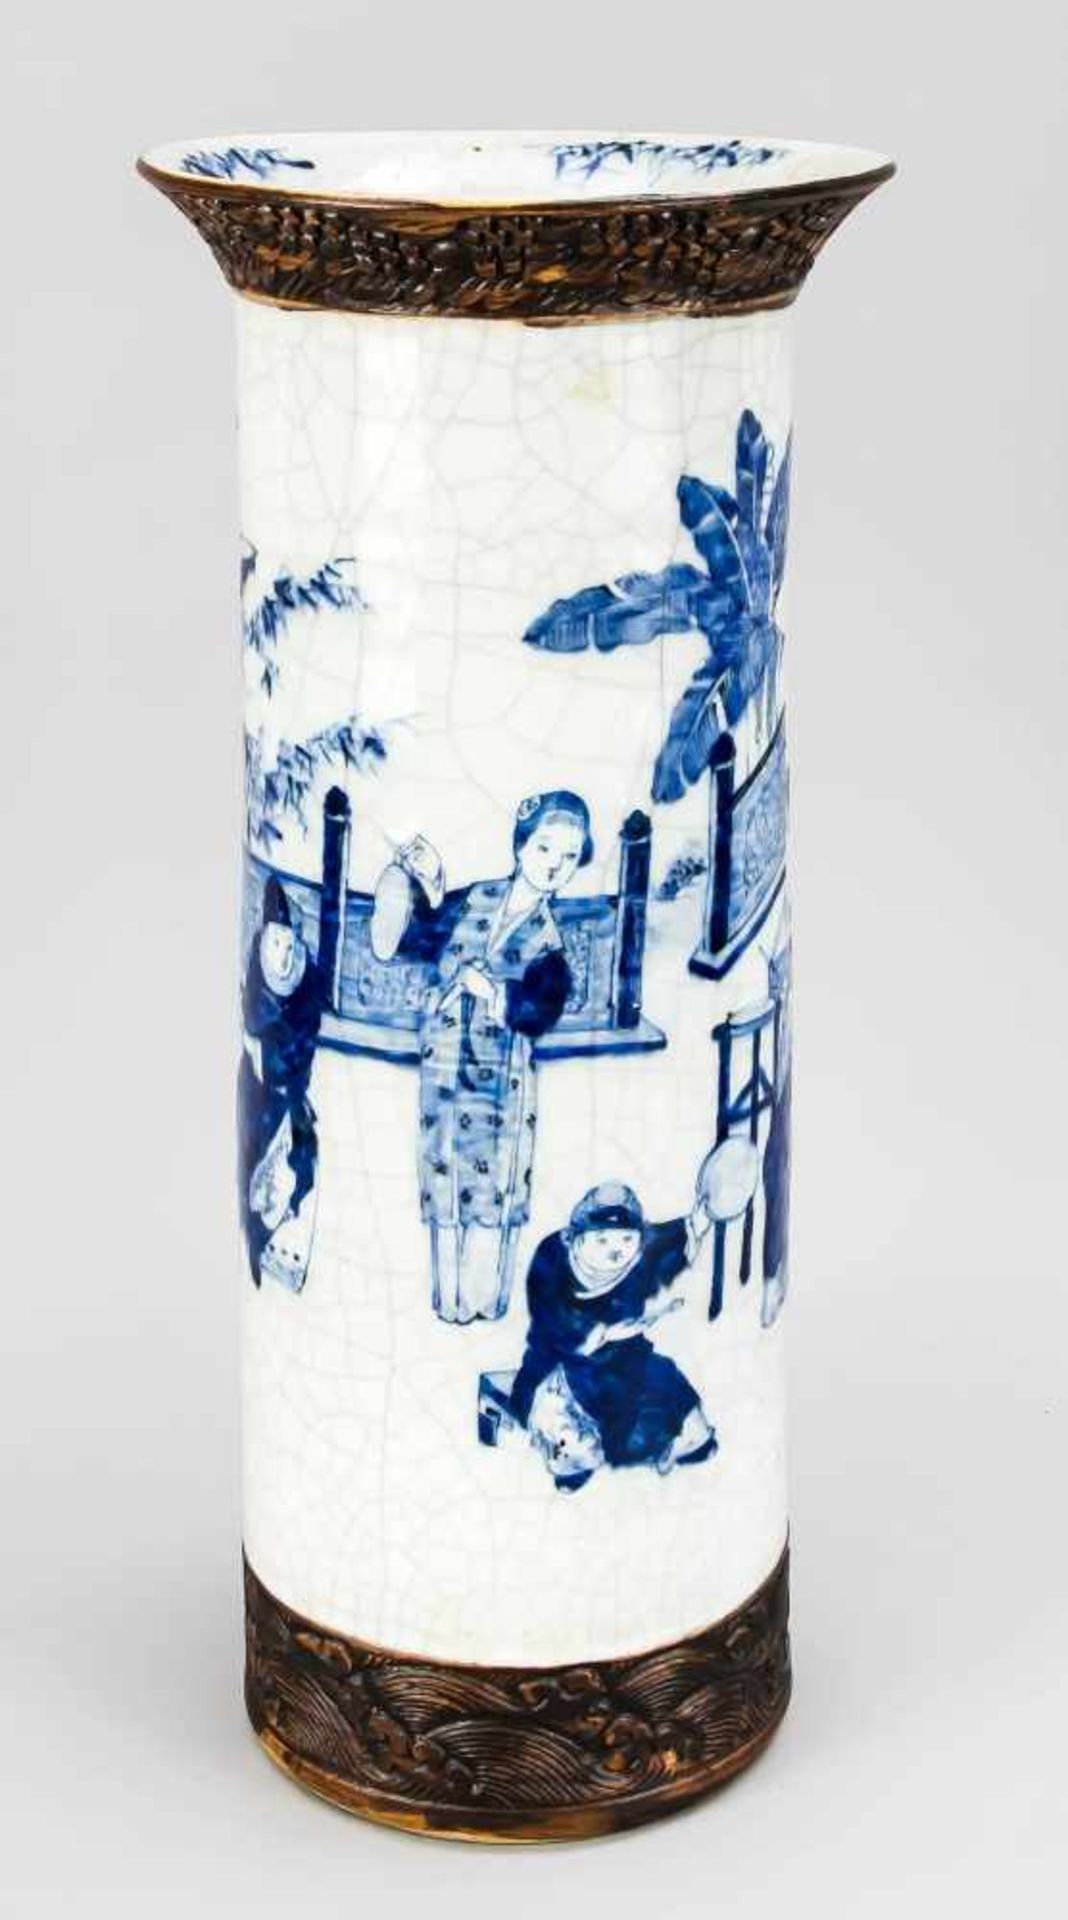 Pole vase, China, 19th / 20th Circular decor in cobalt blue with a multi-figure garden